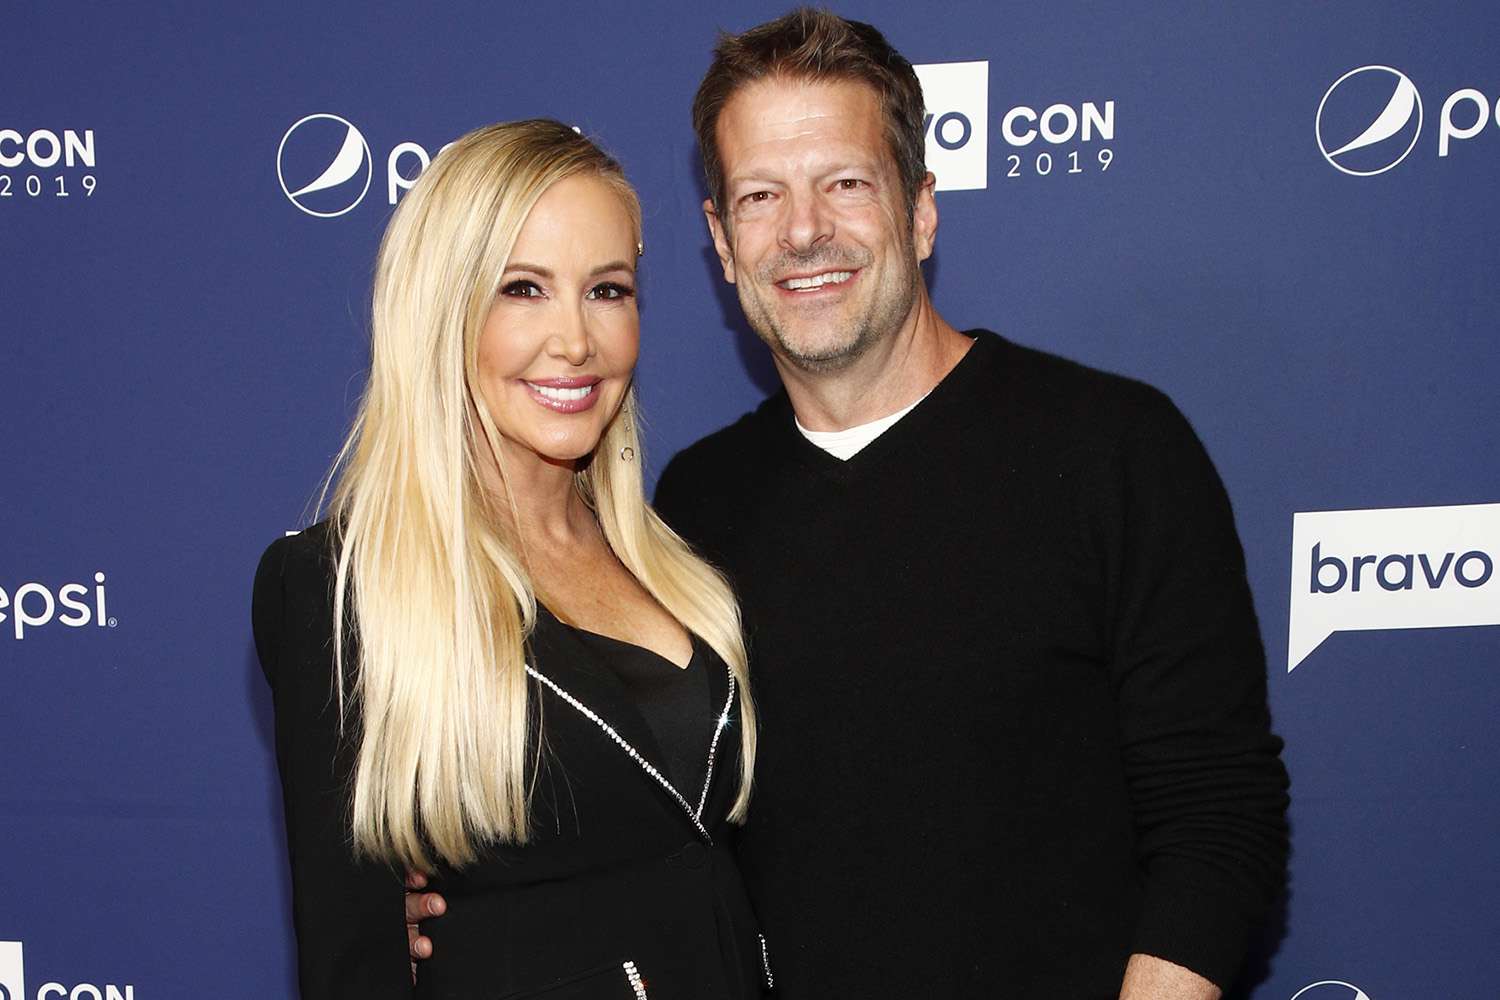 Shannon Beador Claims She Was Dating John Janssen Again Before Her DUI: 'It Wasn’t a Good Time' (Exclusive)